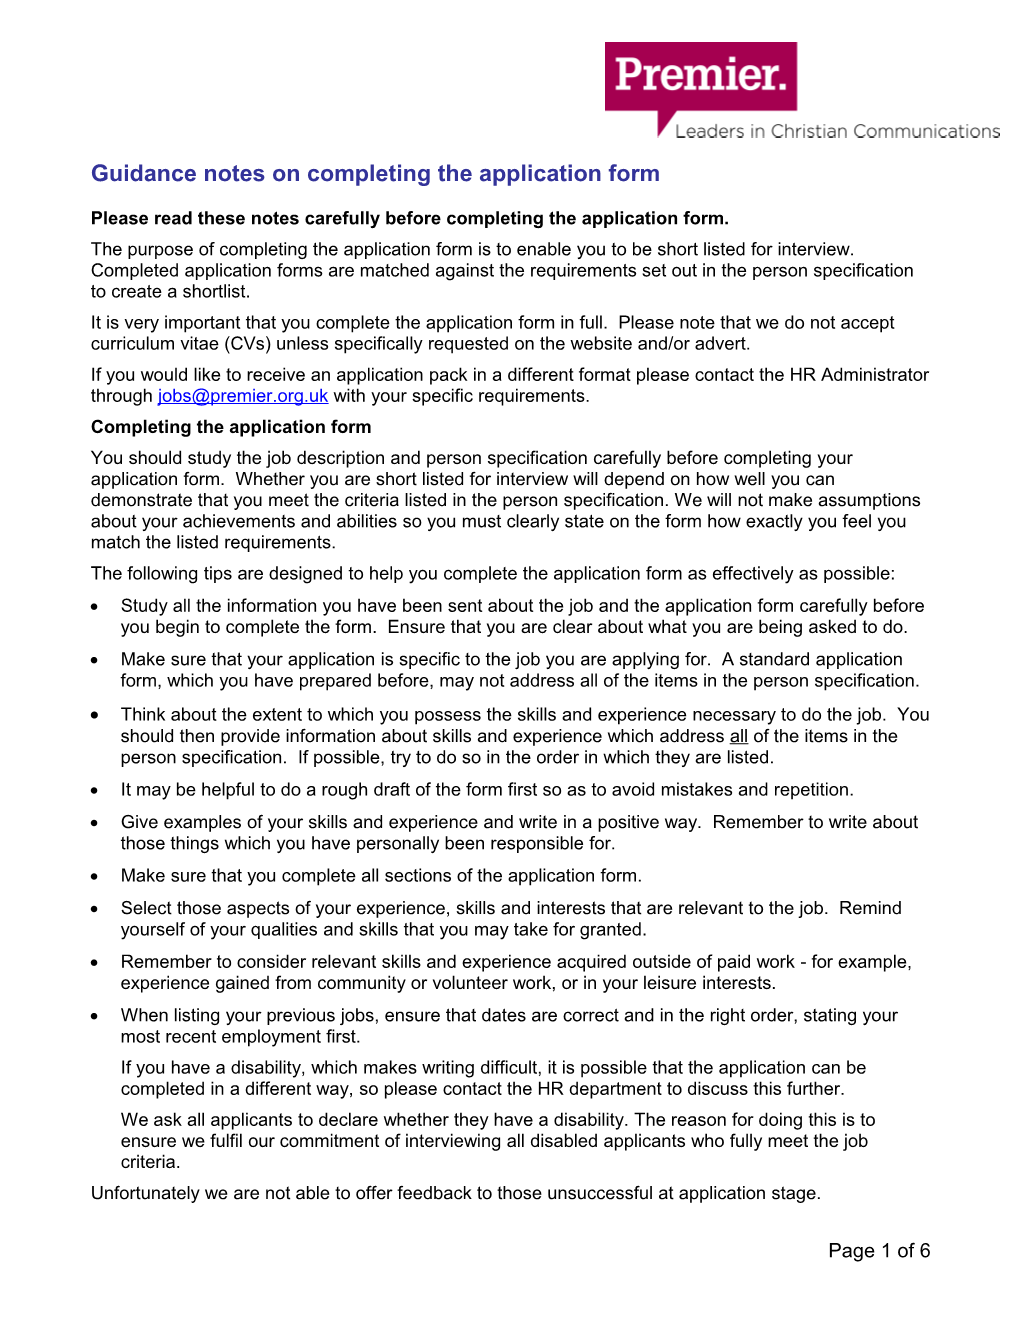 Guidance Notes on Completing the Application Form